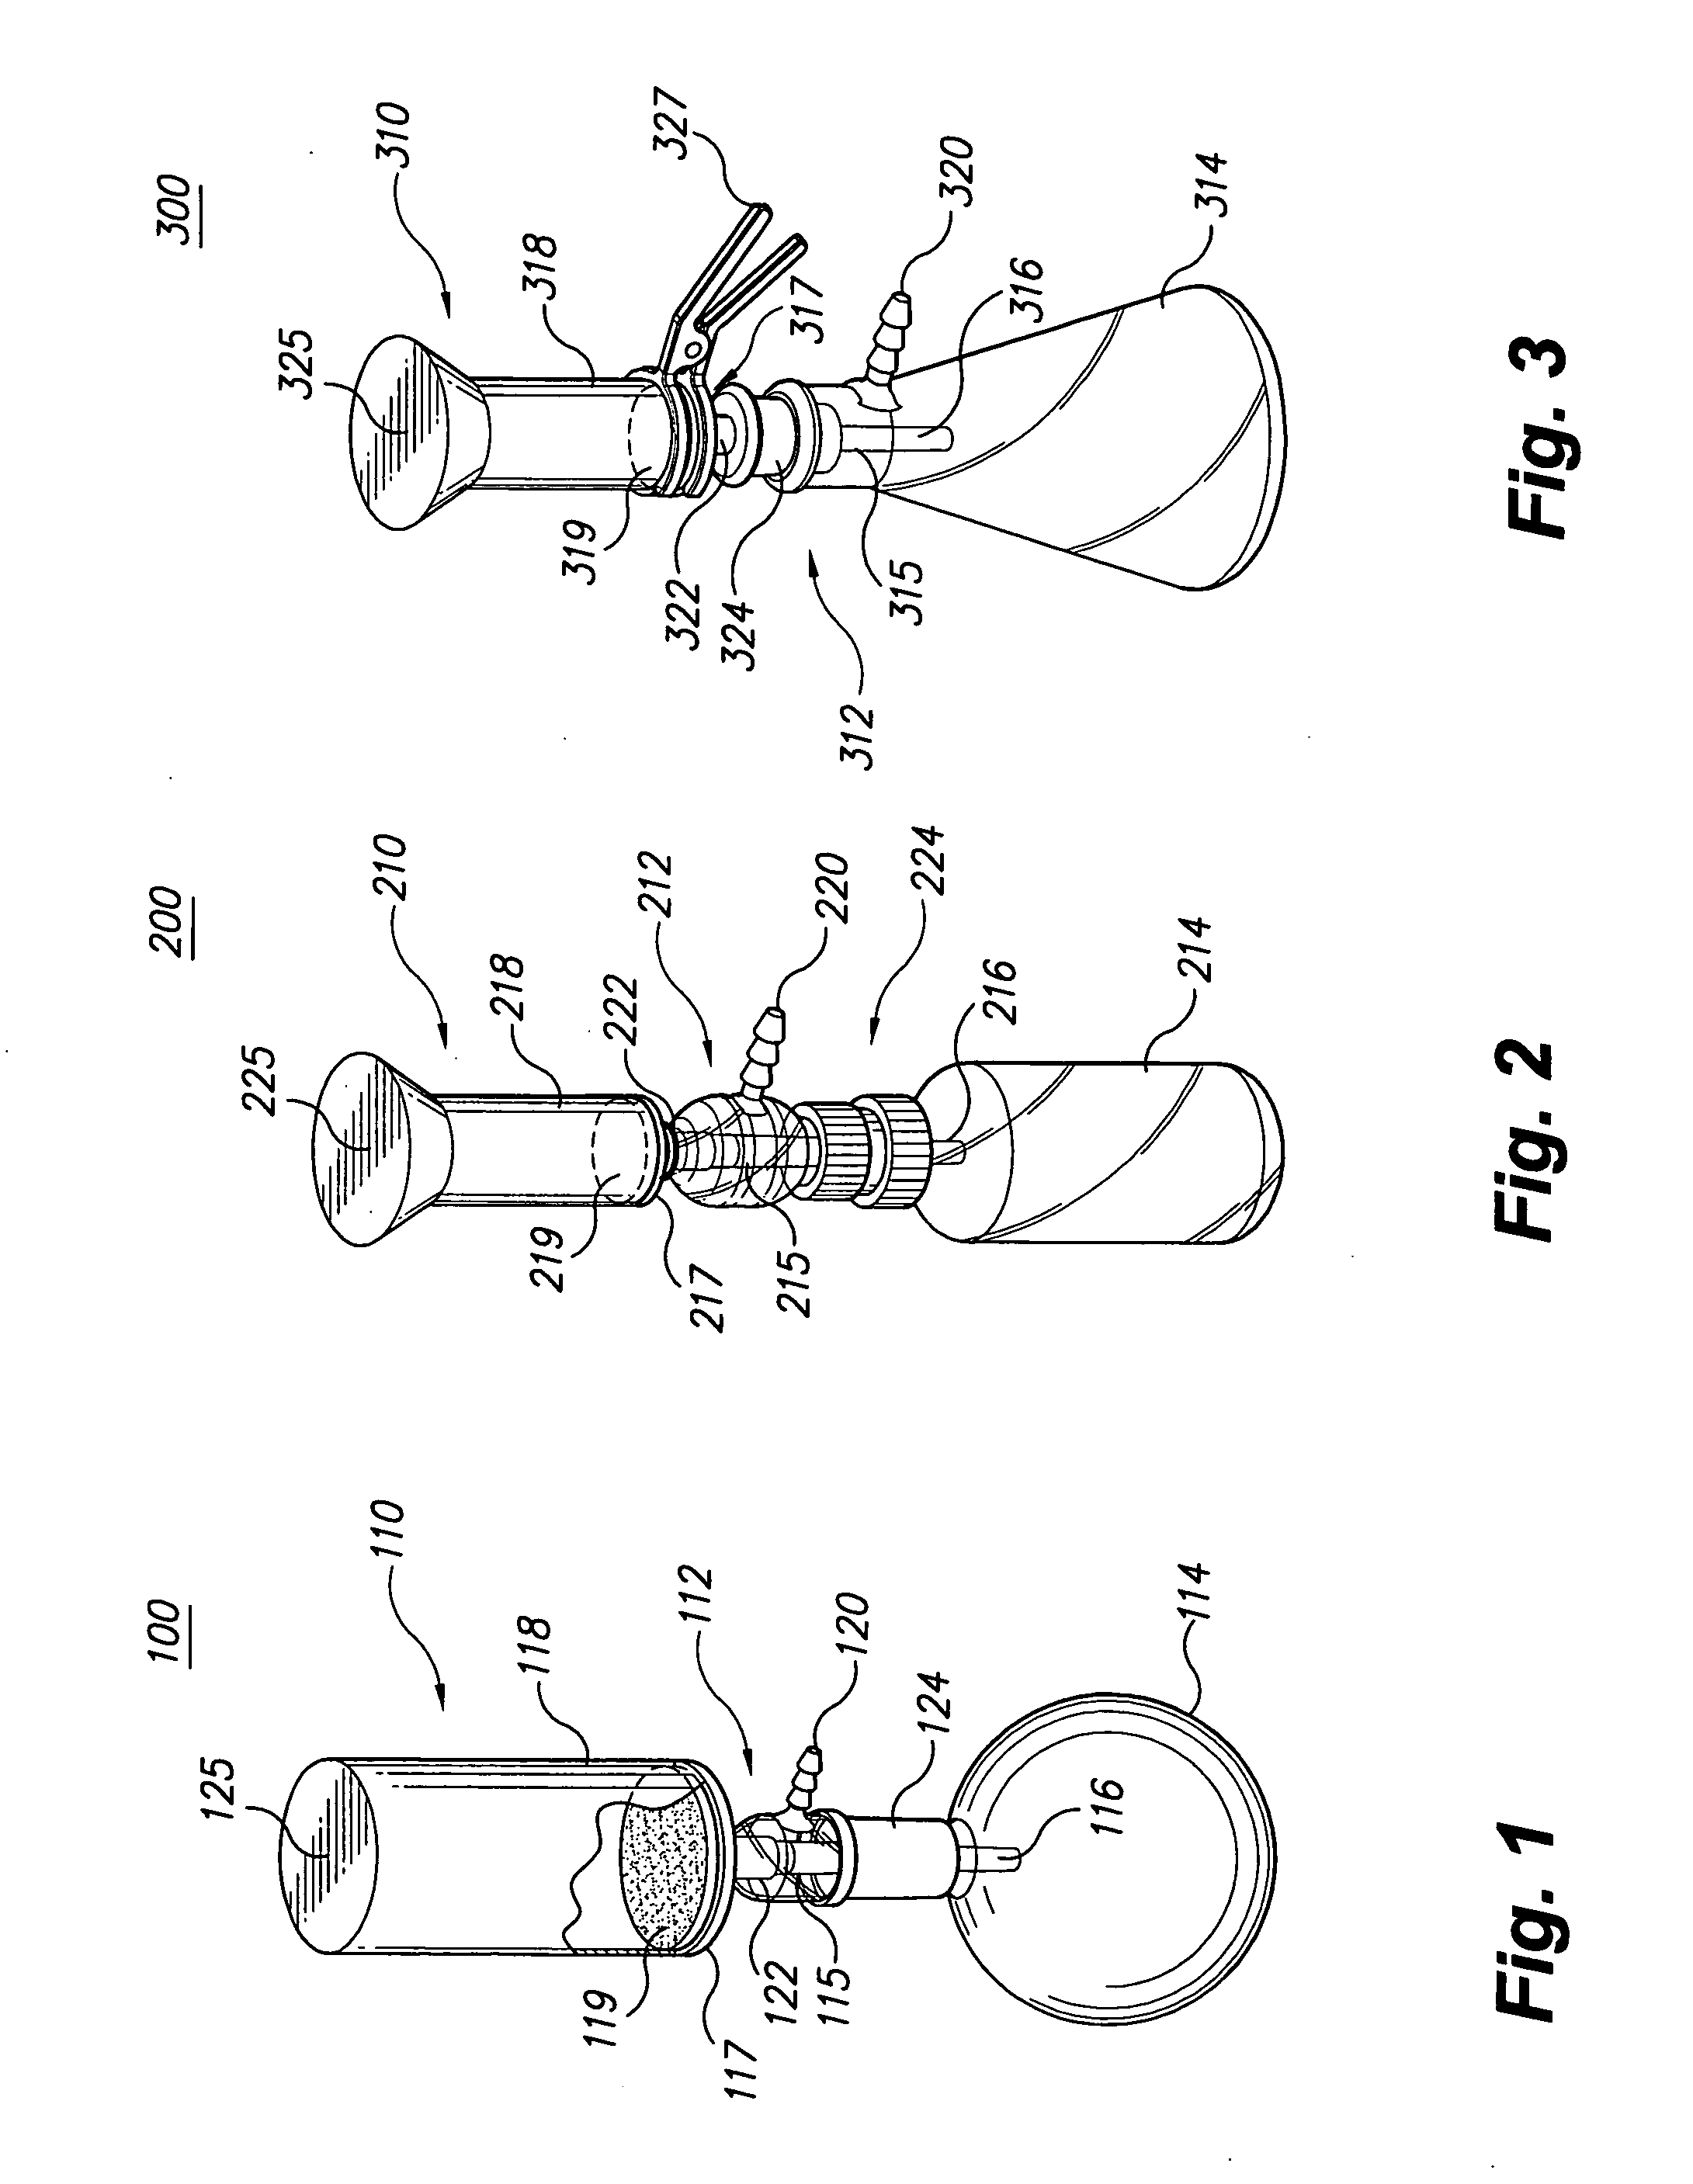 Disposable polymer-structured filtering kit